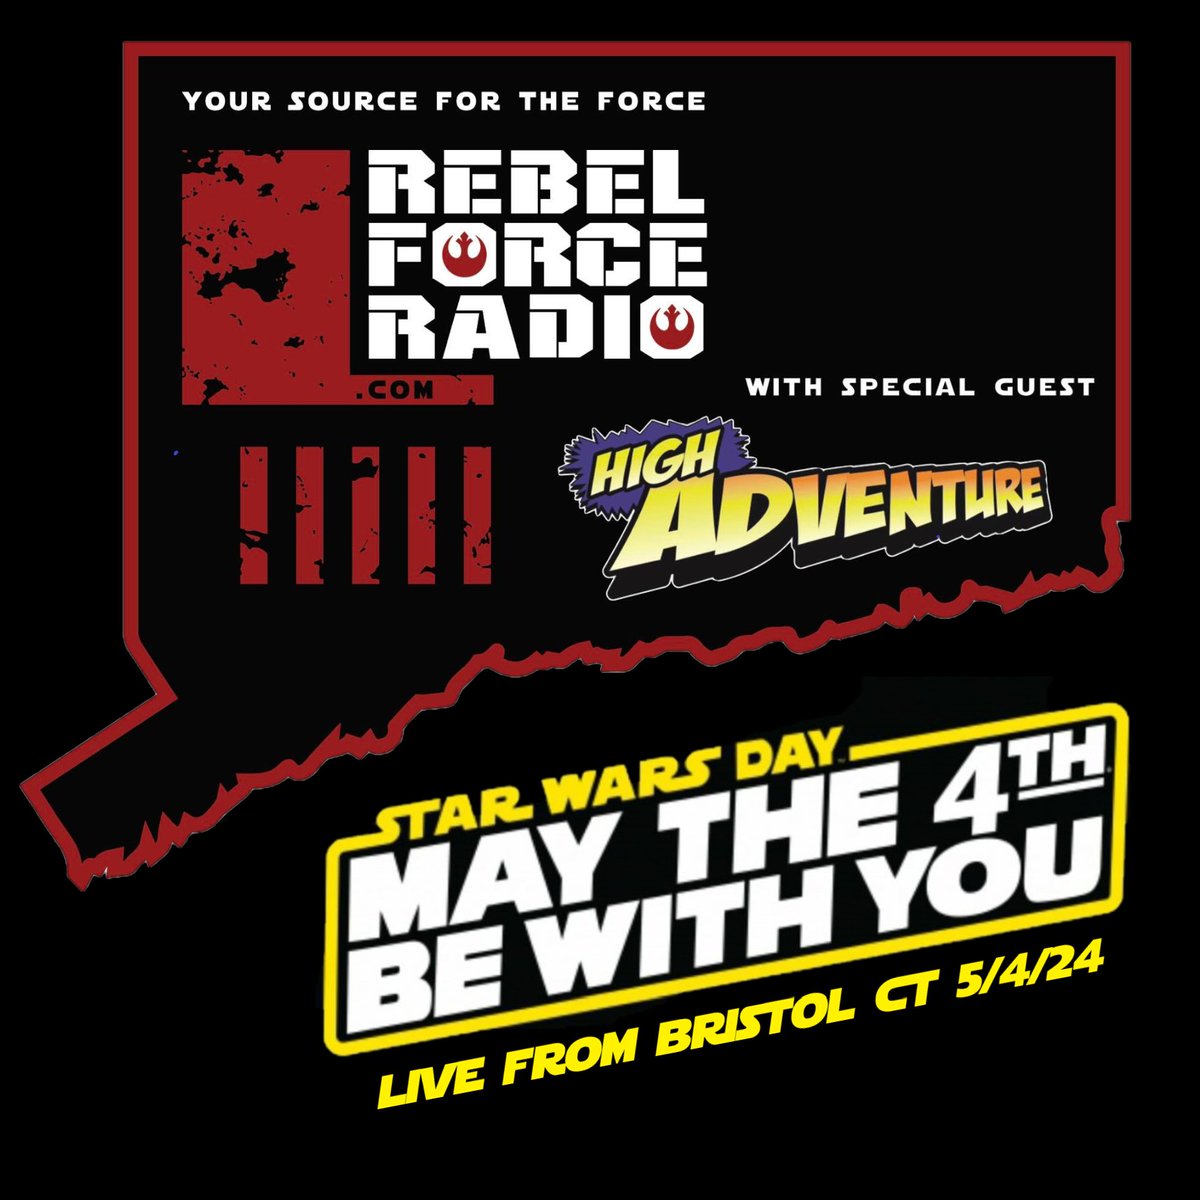 RFR descended upon the city of Bristol, CT on May the Fourth for a live show in front of a great crowd at the Rockwell Theater to celebrate 'Star Wars Day' LISTEN >>> dts.podtrac.com/redirect.mp3/t…
#StarWars #MayTheFourthBeWithYou #BristolCT #Podcast #StarWarsPodcast #MayThe4th